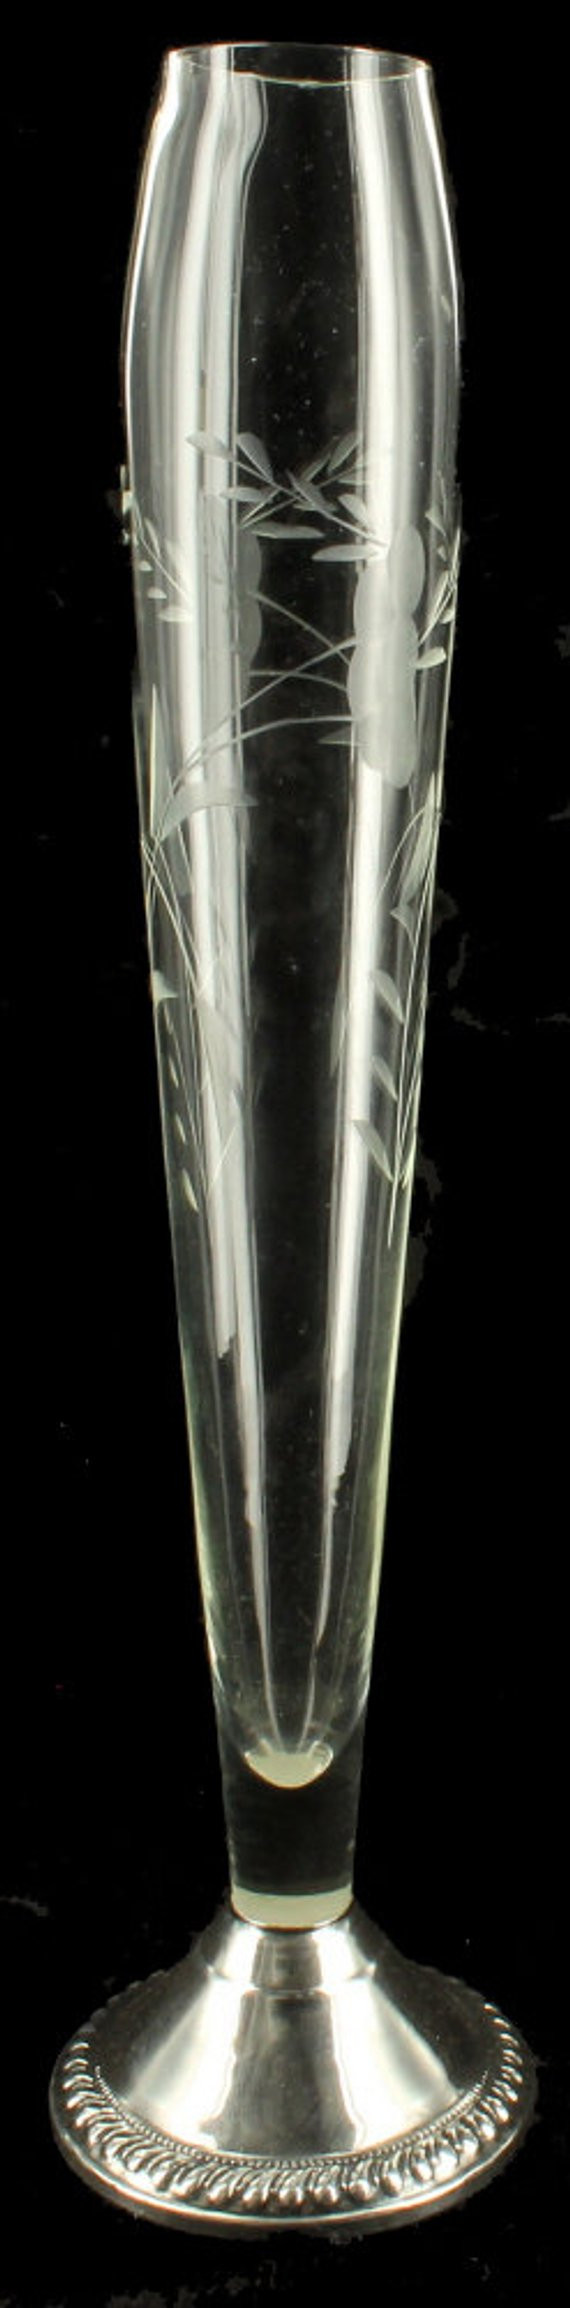 12 attractive Vintage Green Glass Bud Vase 2024 free download vintage green glass bud vase of vintage art deco etched glass sterling silver base bud vase etsy with image 0